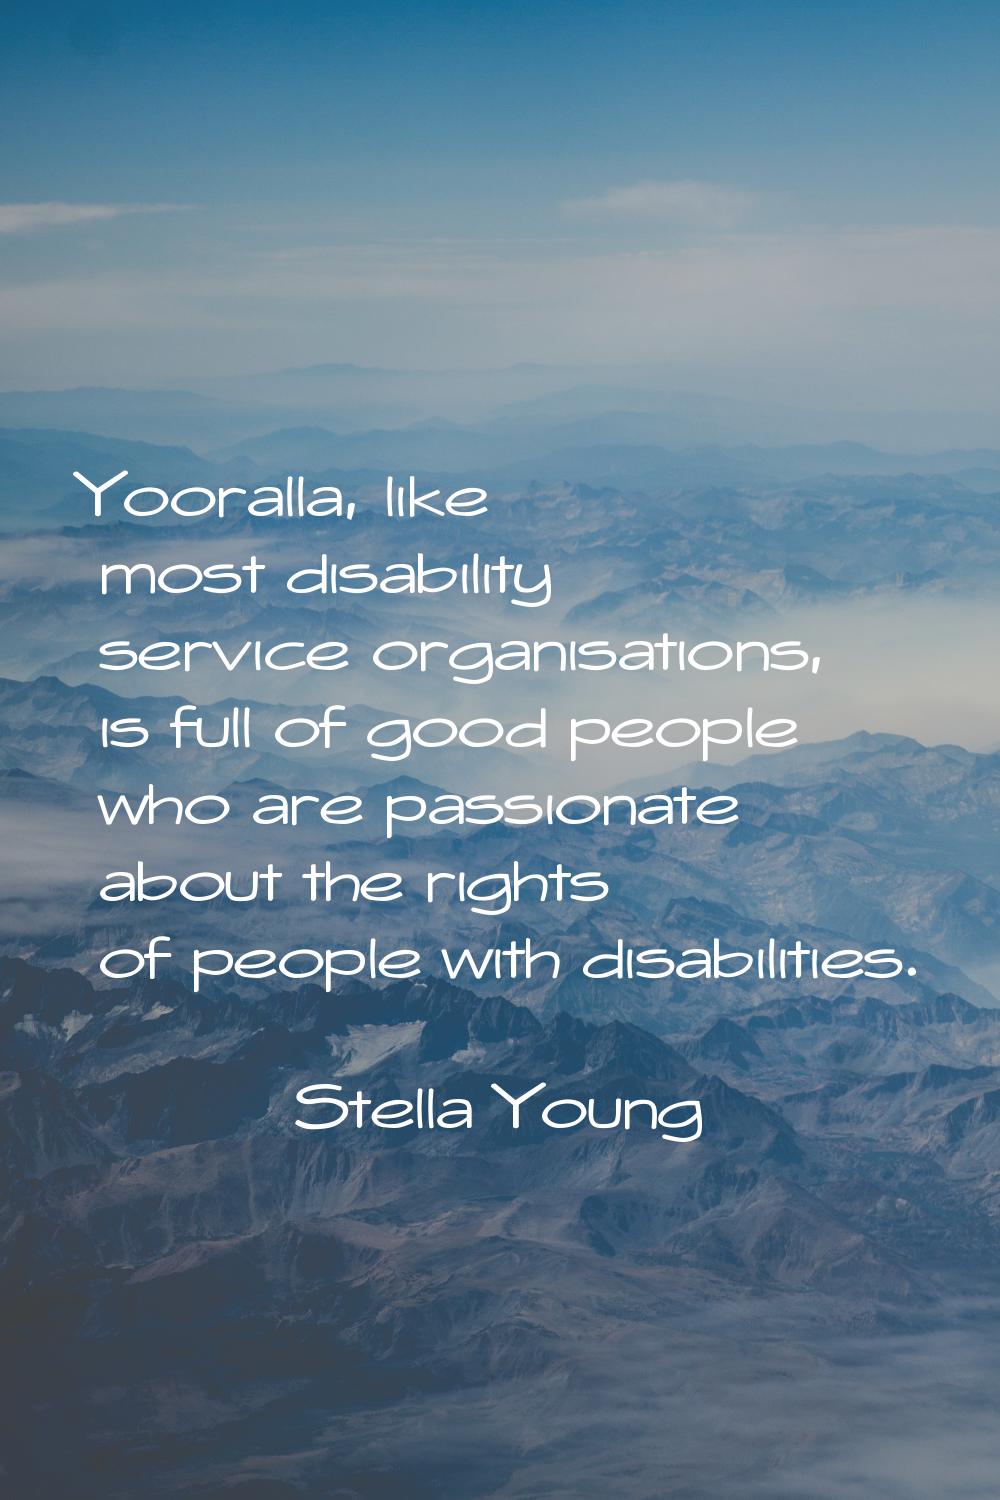 Yooralla, like most disability service organisations, is full of good people who are passionate abo